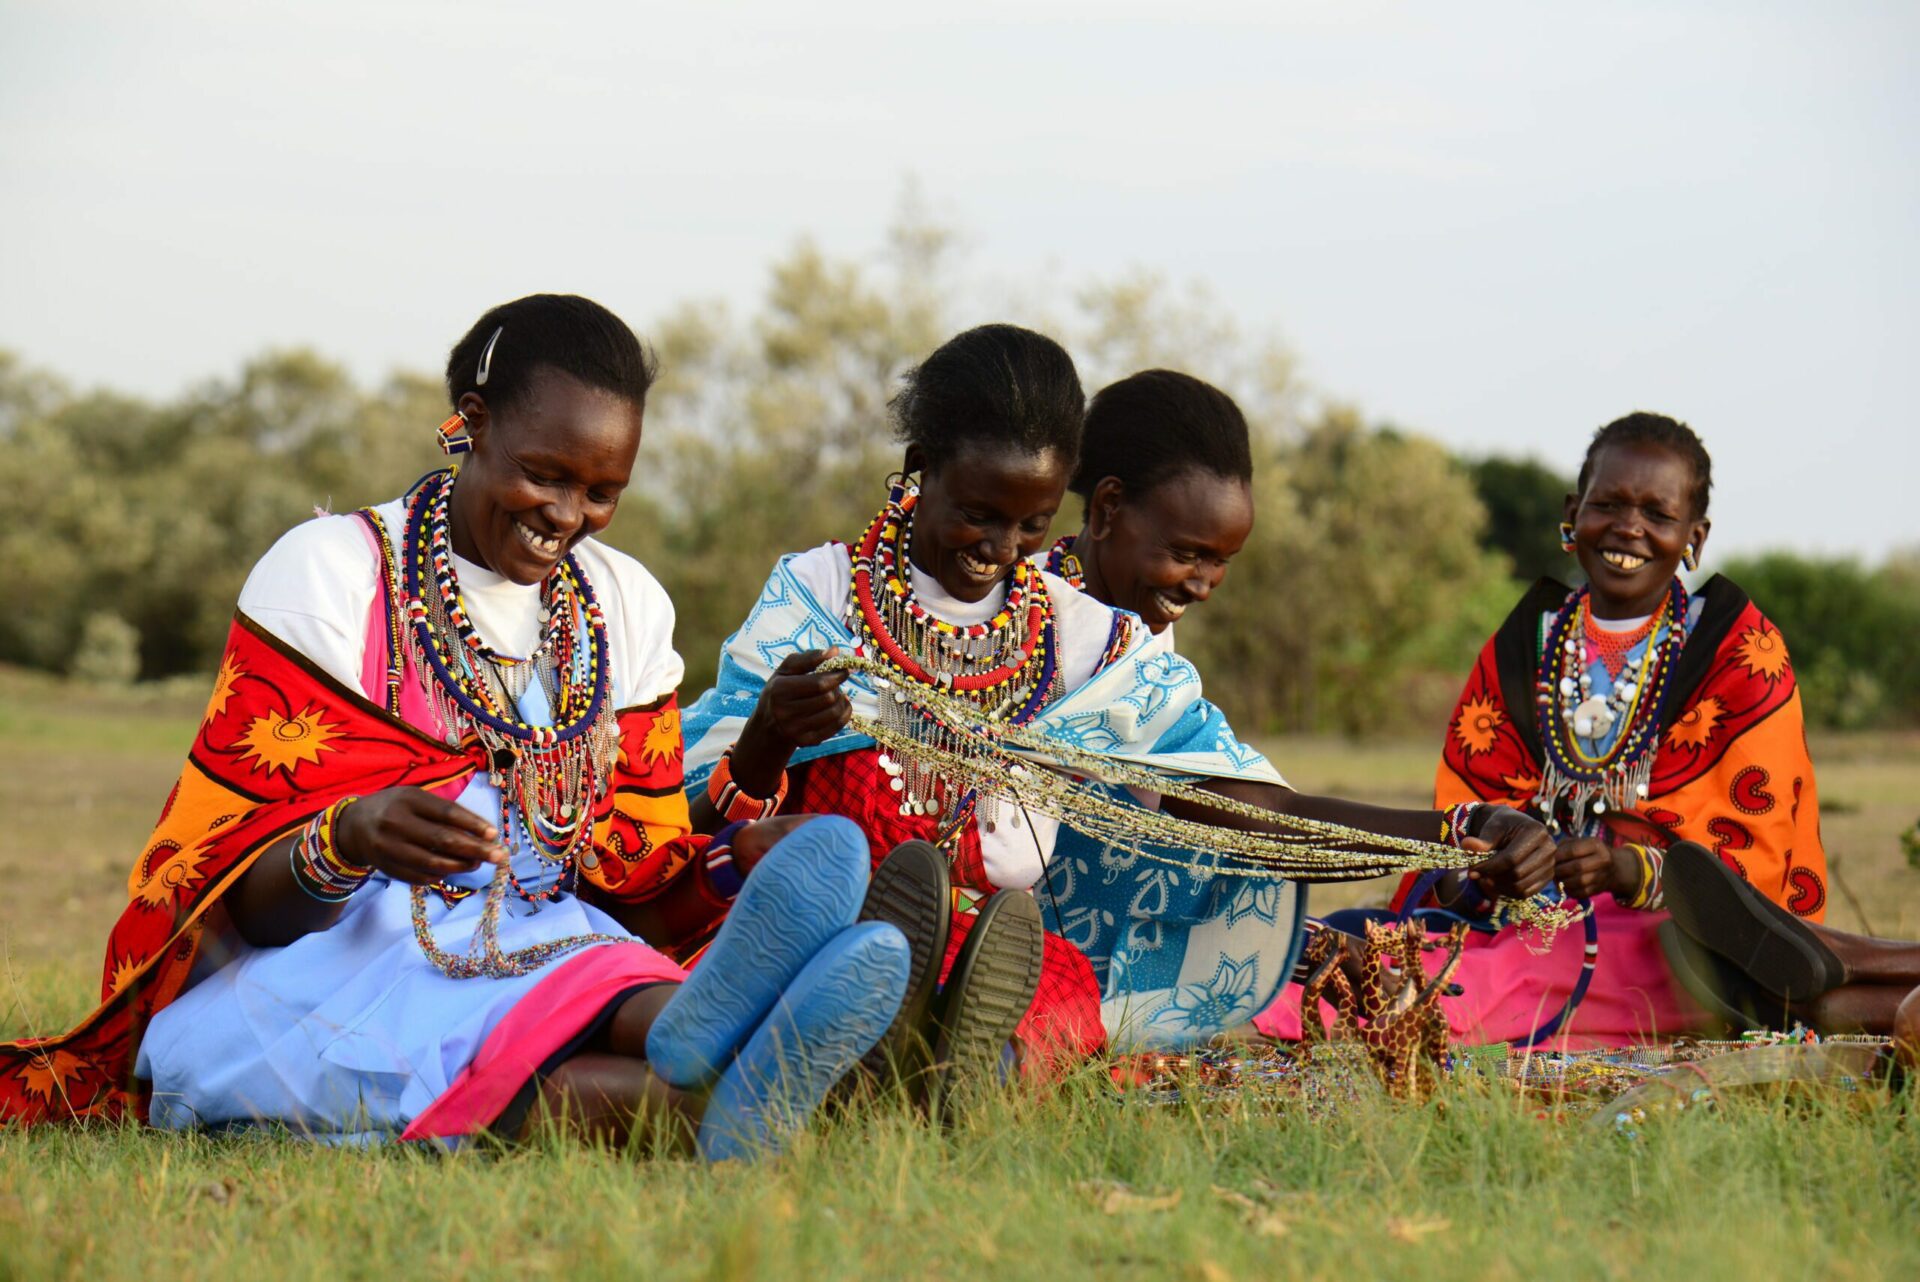 group of brightly dressed Maasai women beading while sitting in the grass